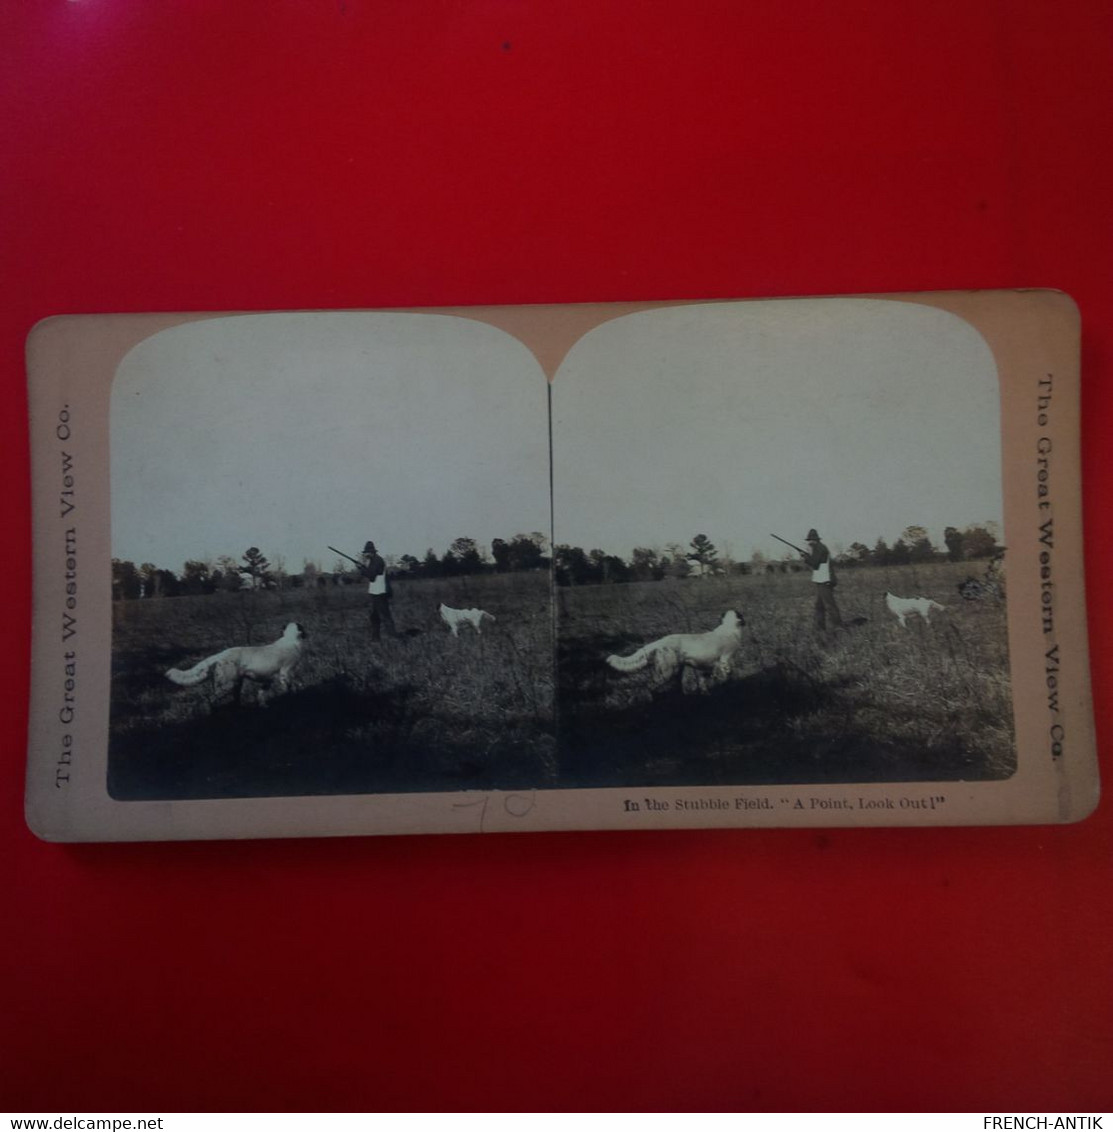 PHOTO STEREO THE GREAT WESTERN IN THE STUBBLE FIELD A POINT LOOK OUT ! CHASSEUR - Stereoscopio